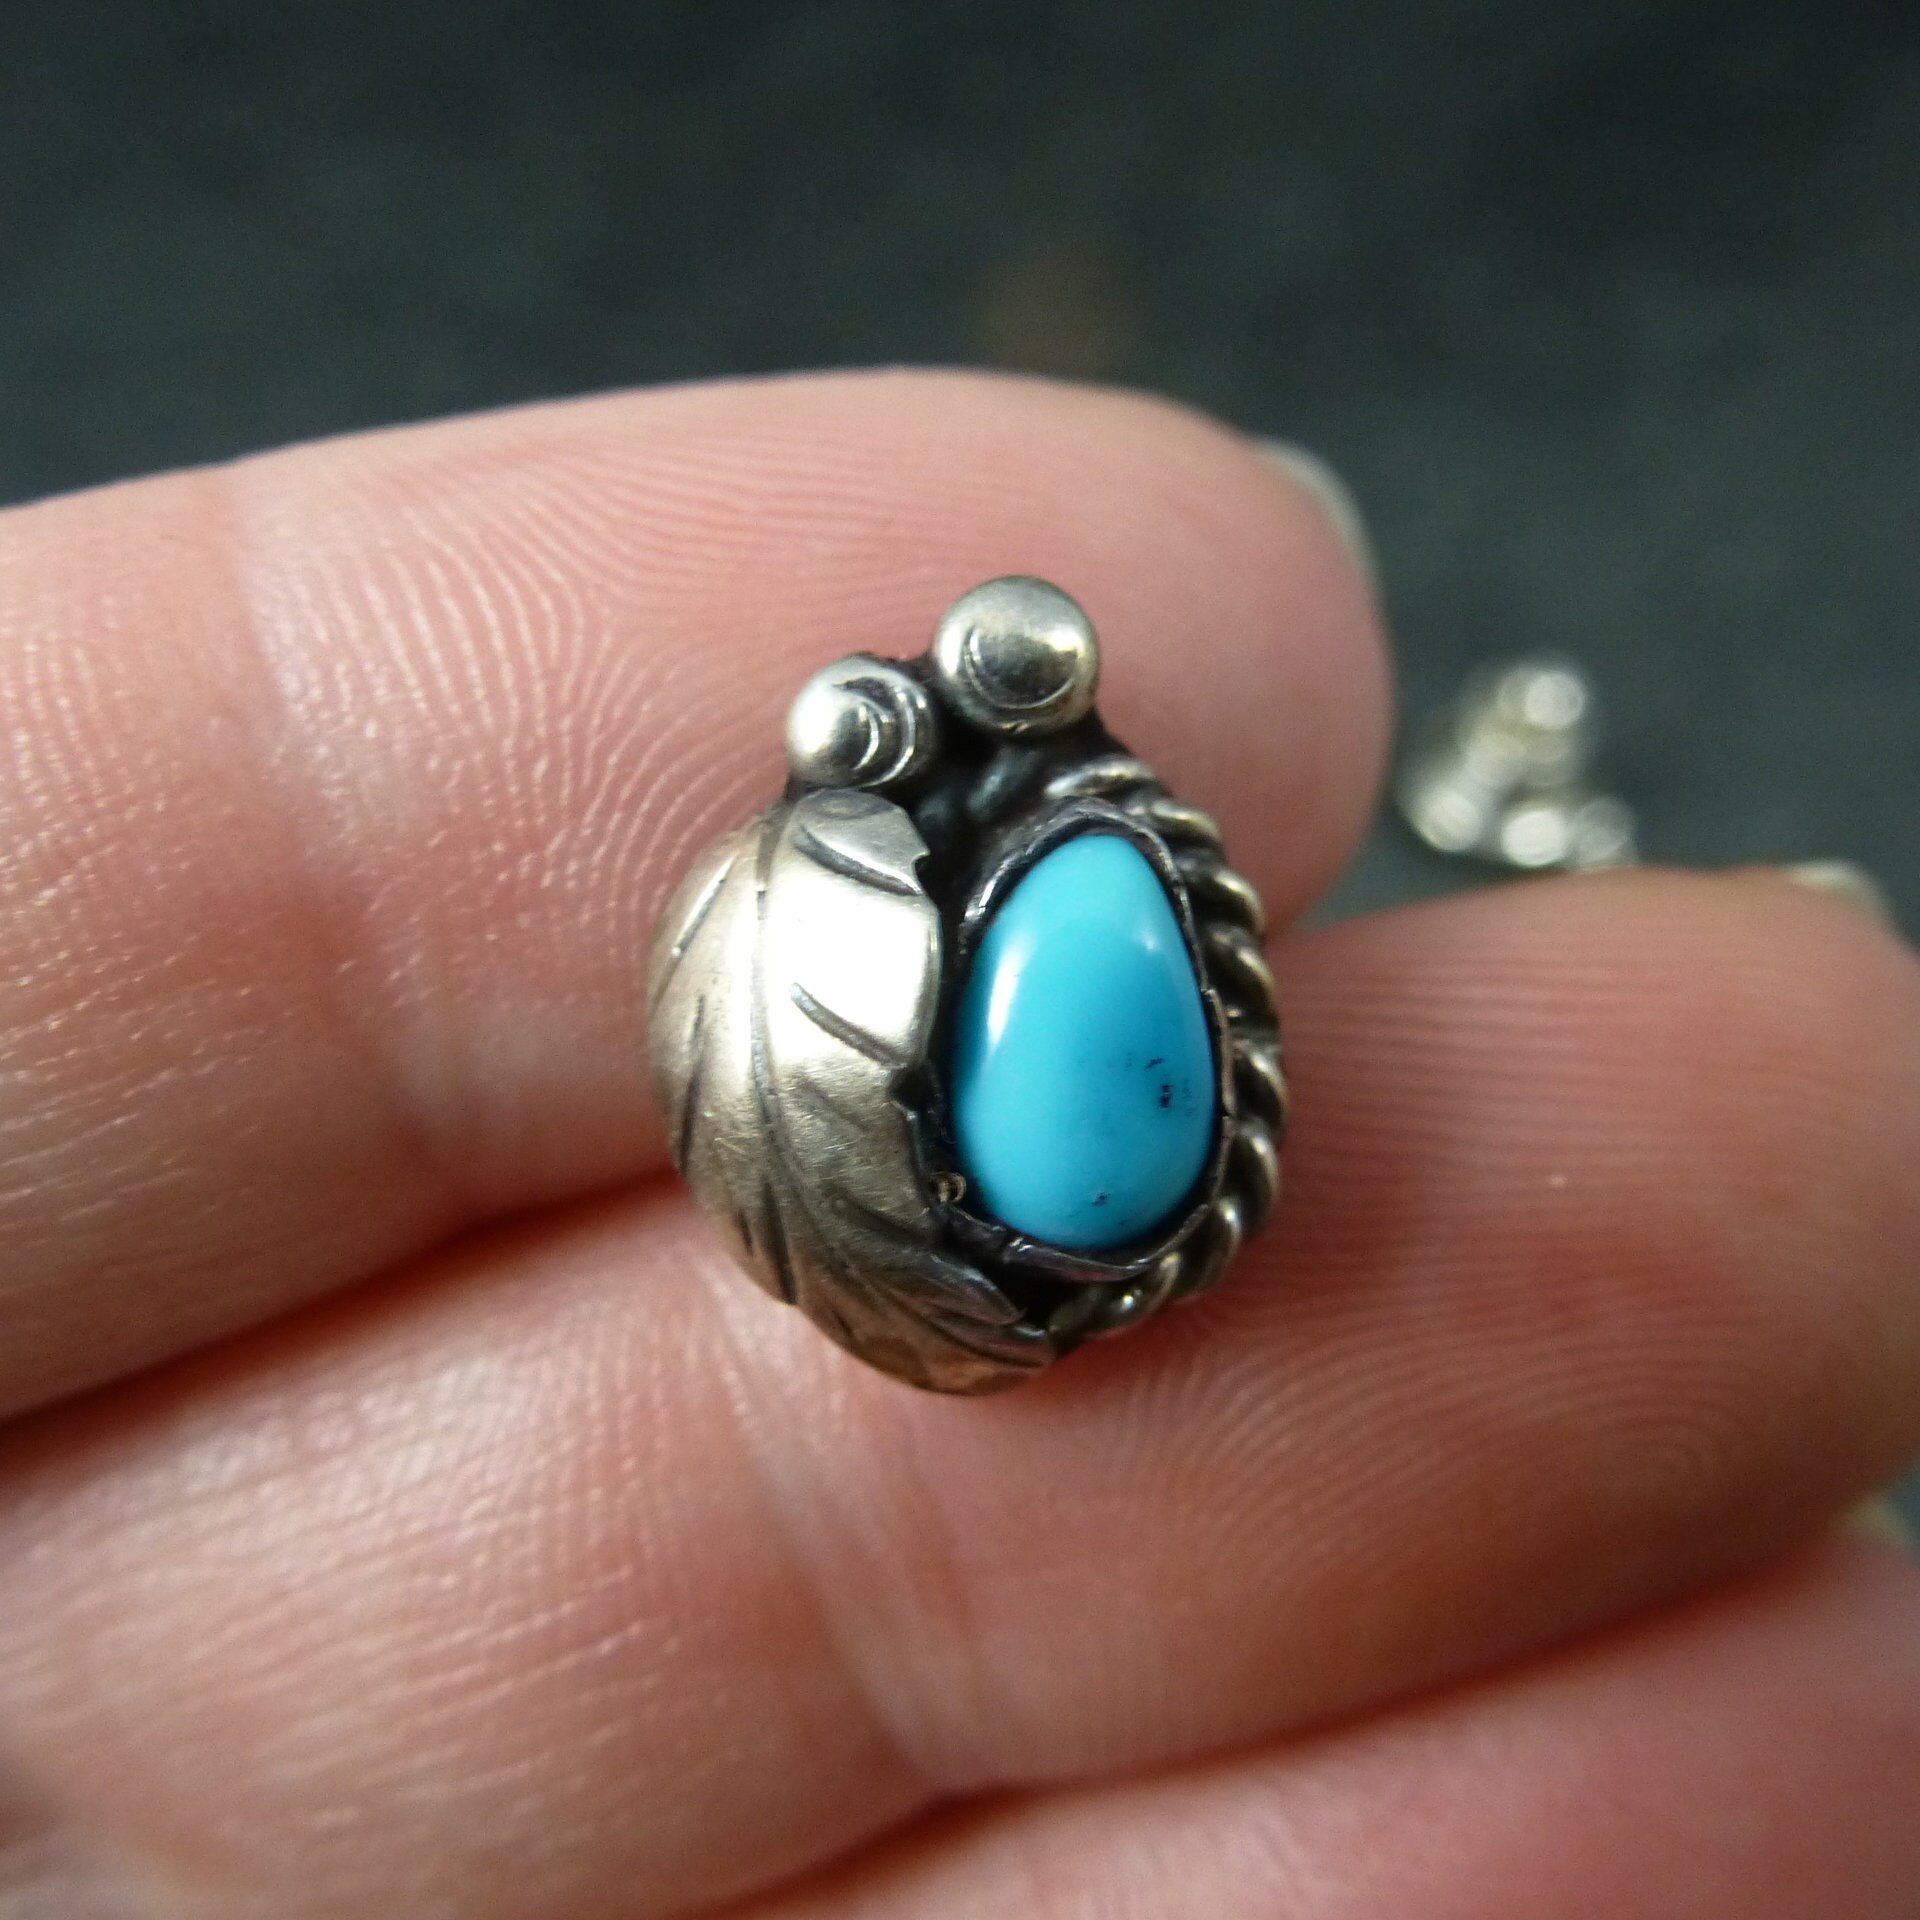 Southwestern Sterling Turquoise Tie Tack